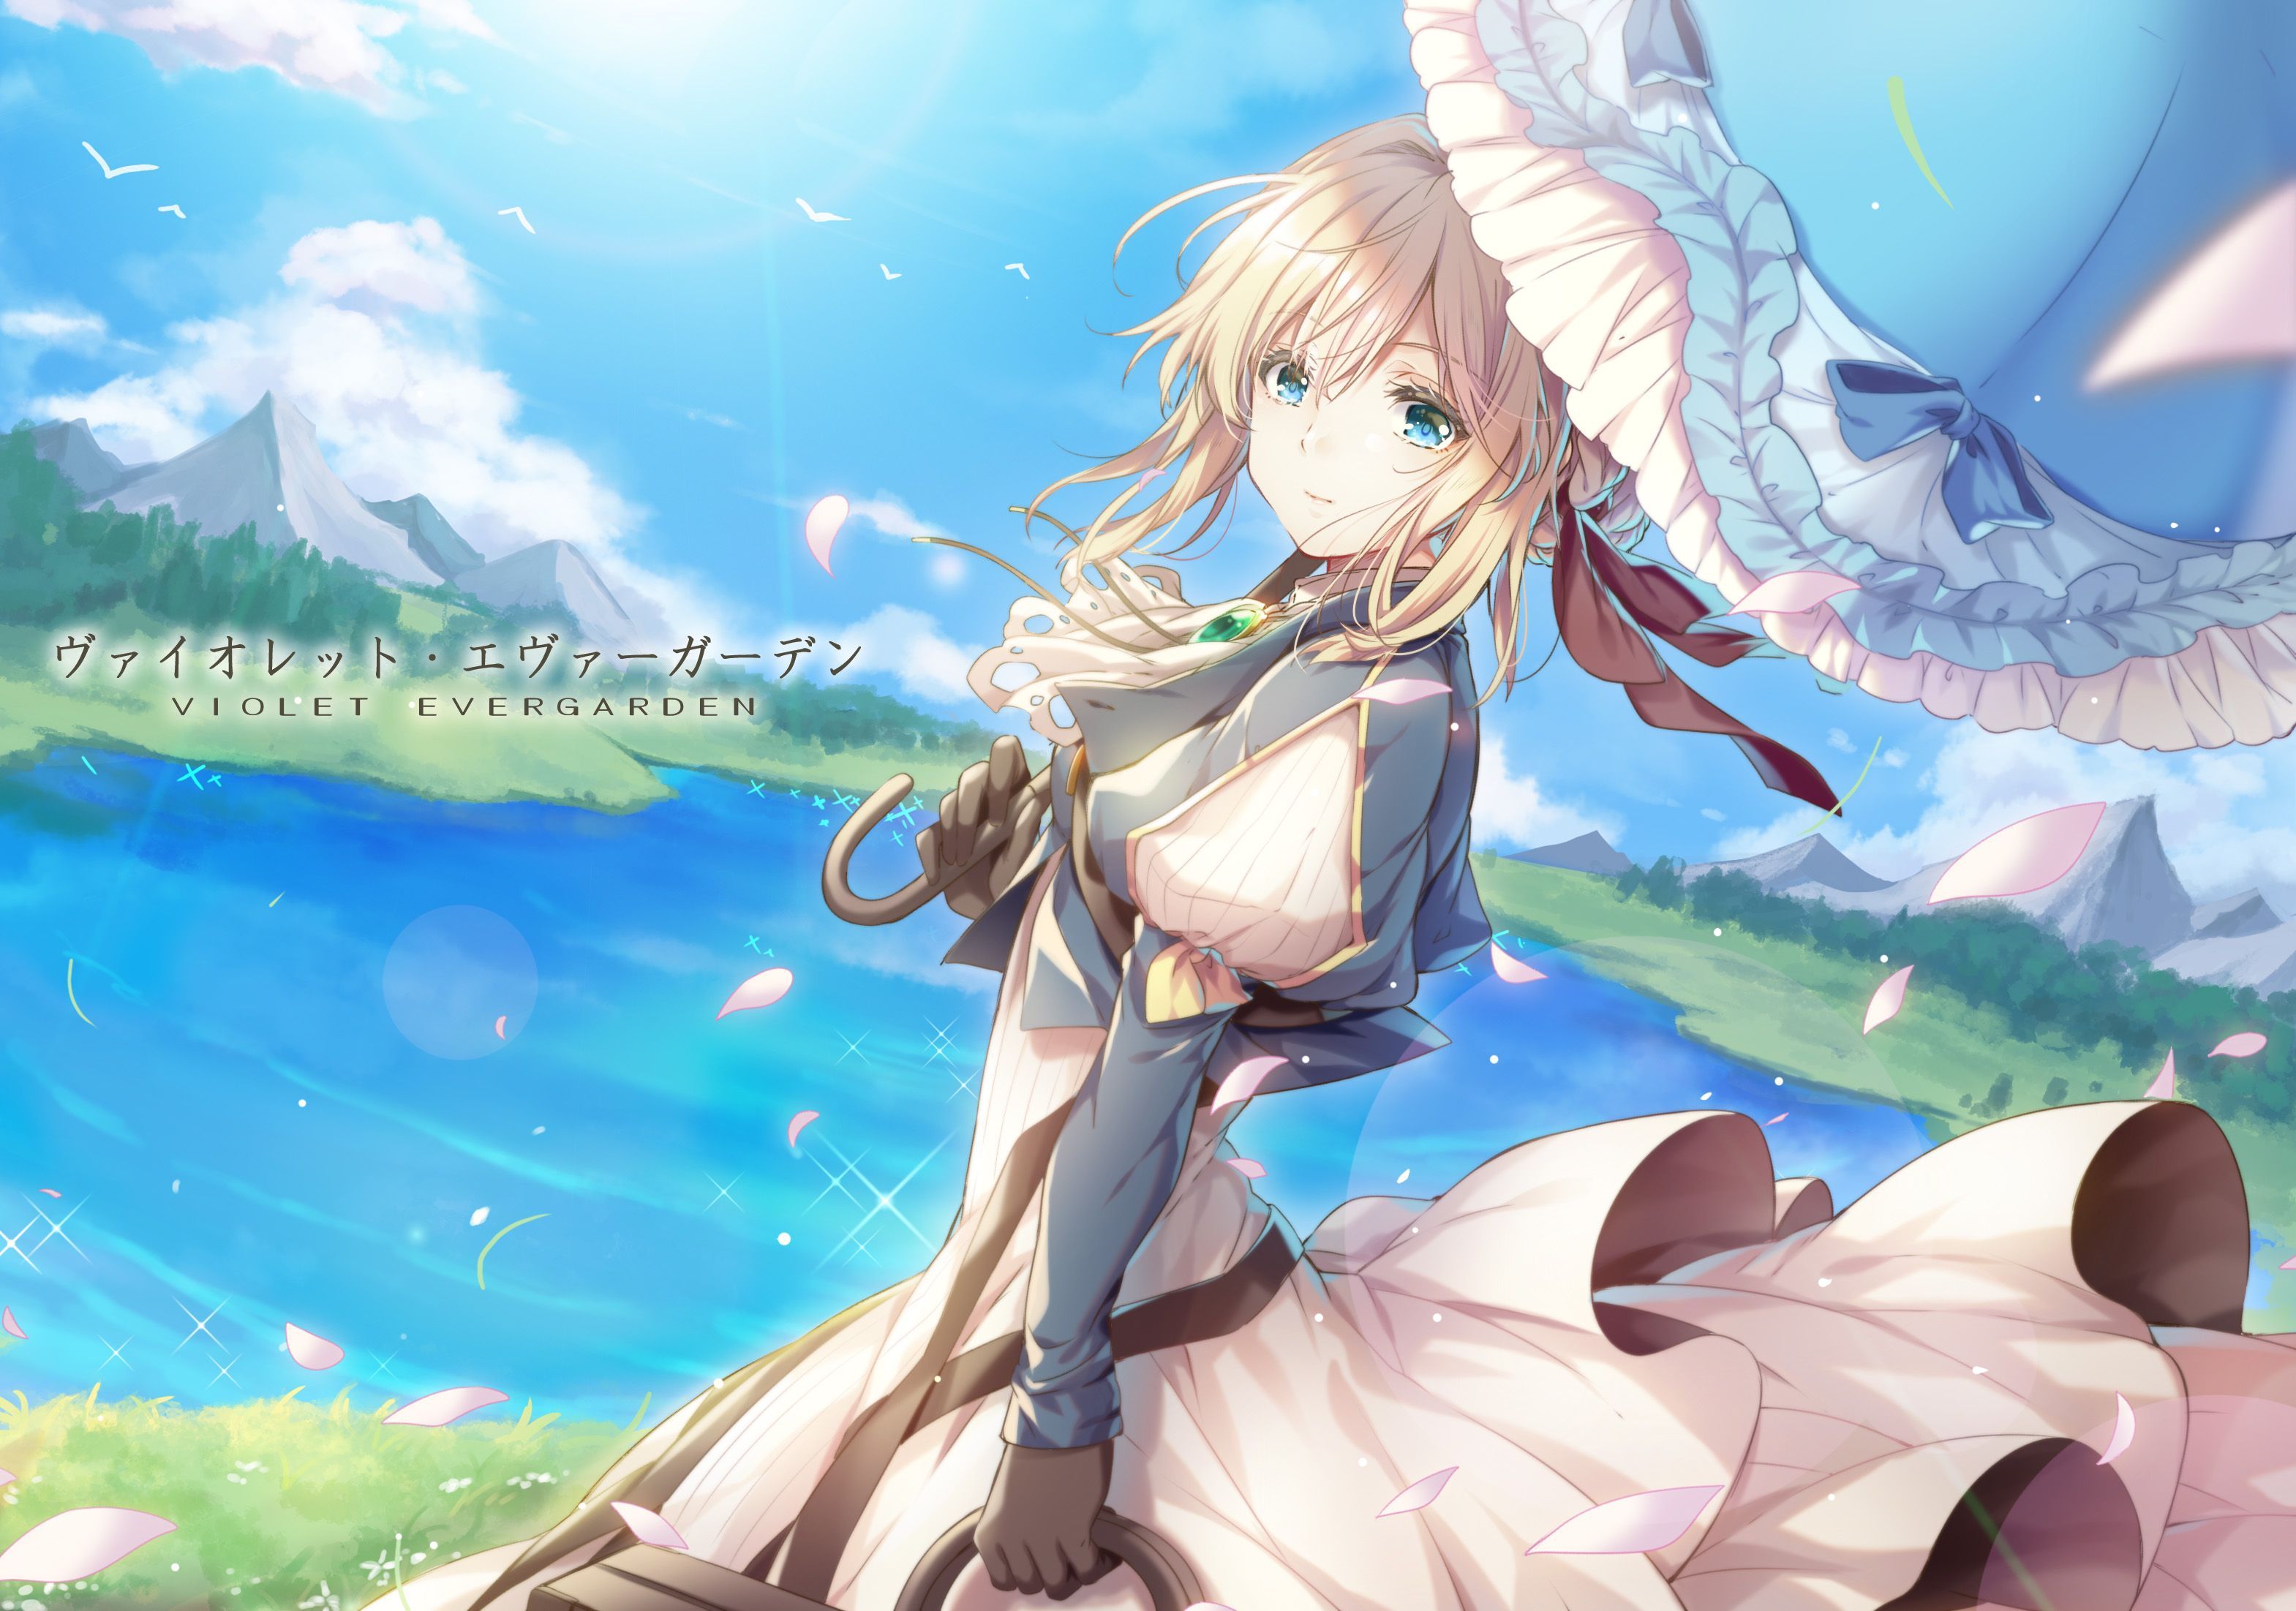 Download for free wallpaper from anime Violet Evergarden with tags